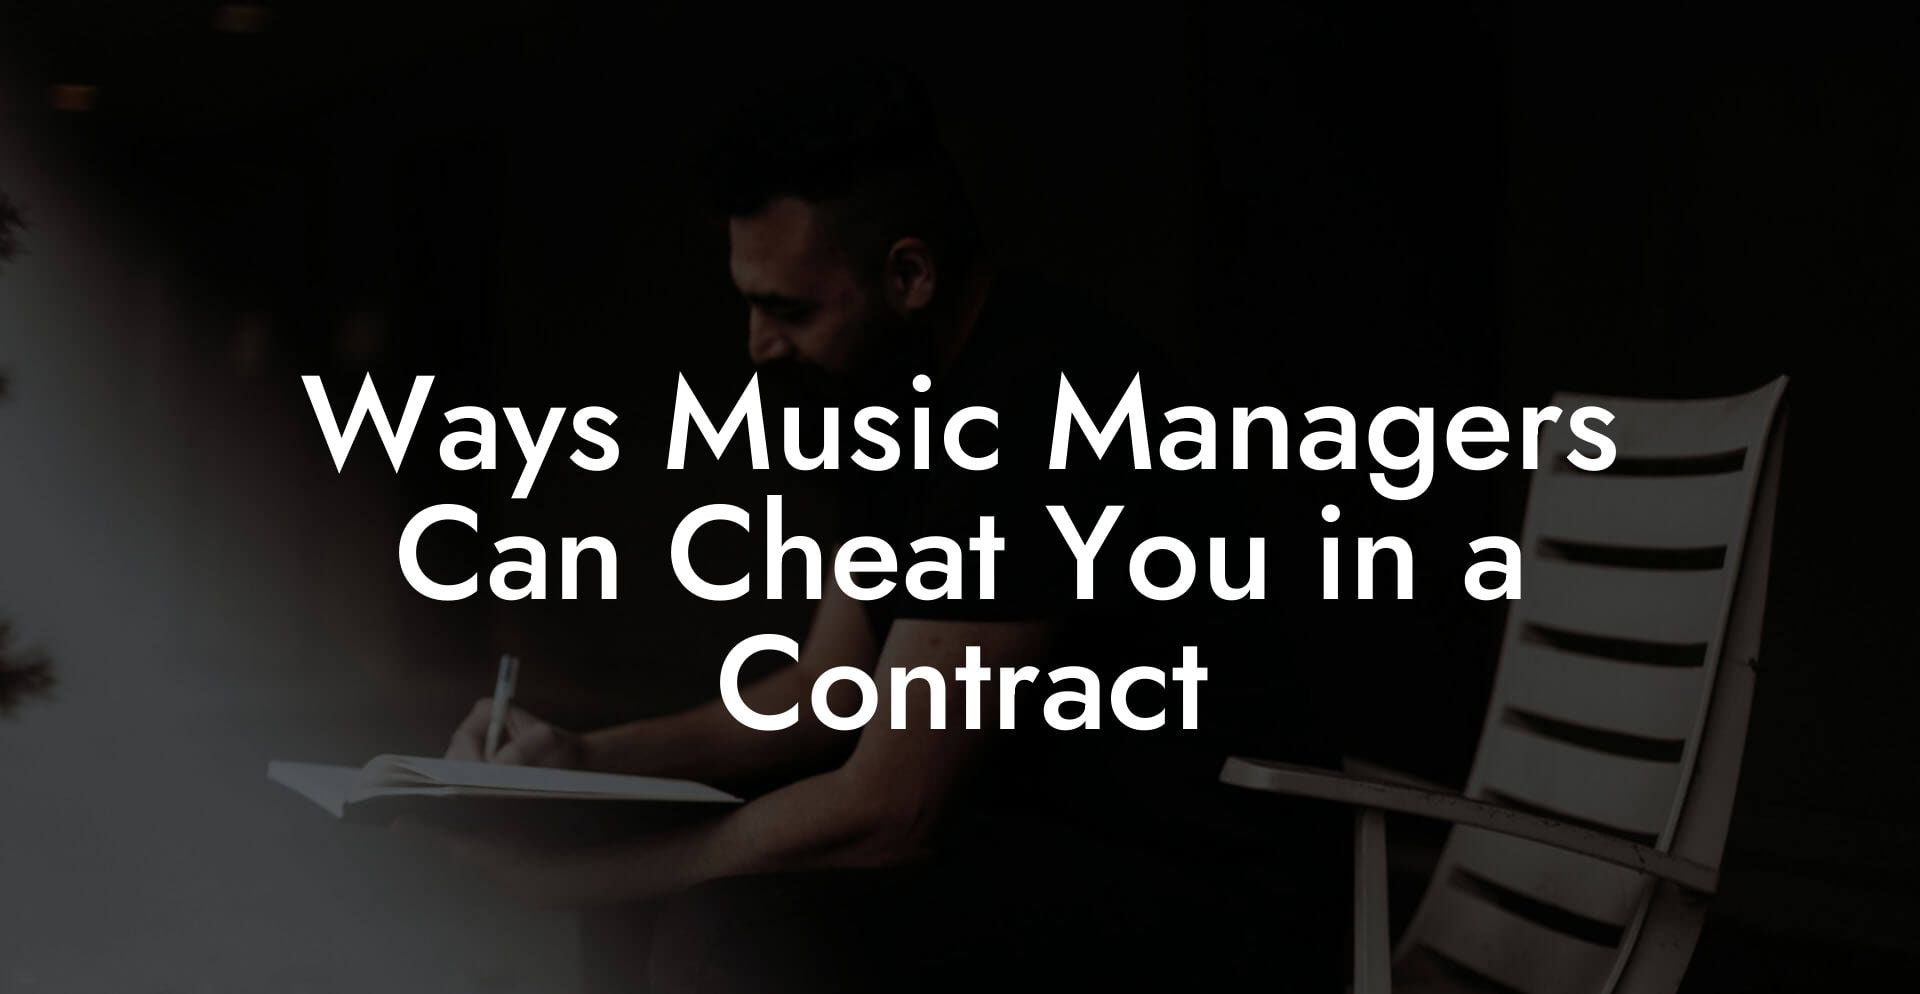 Ways Music Managers Can Cheat You in a Contract